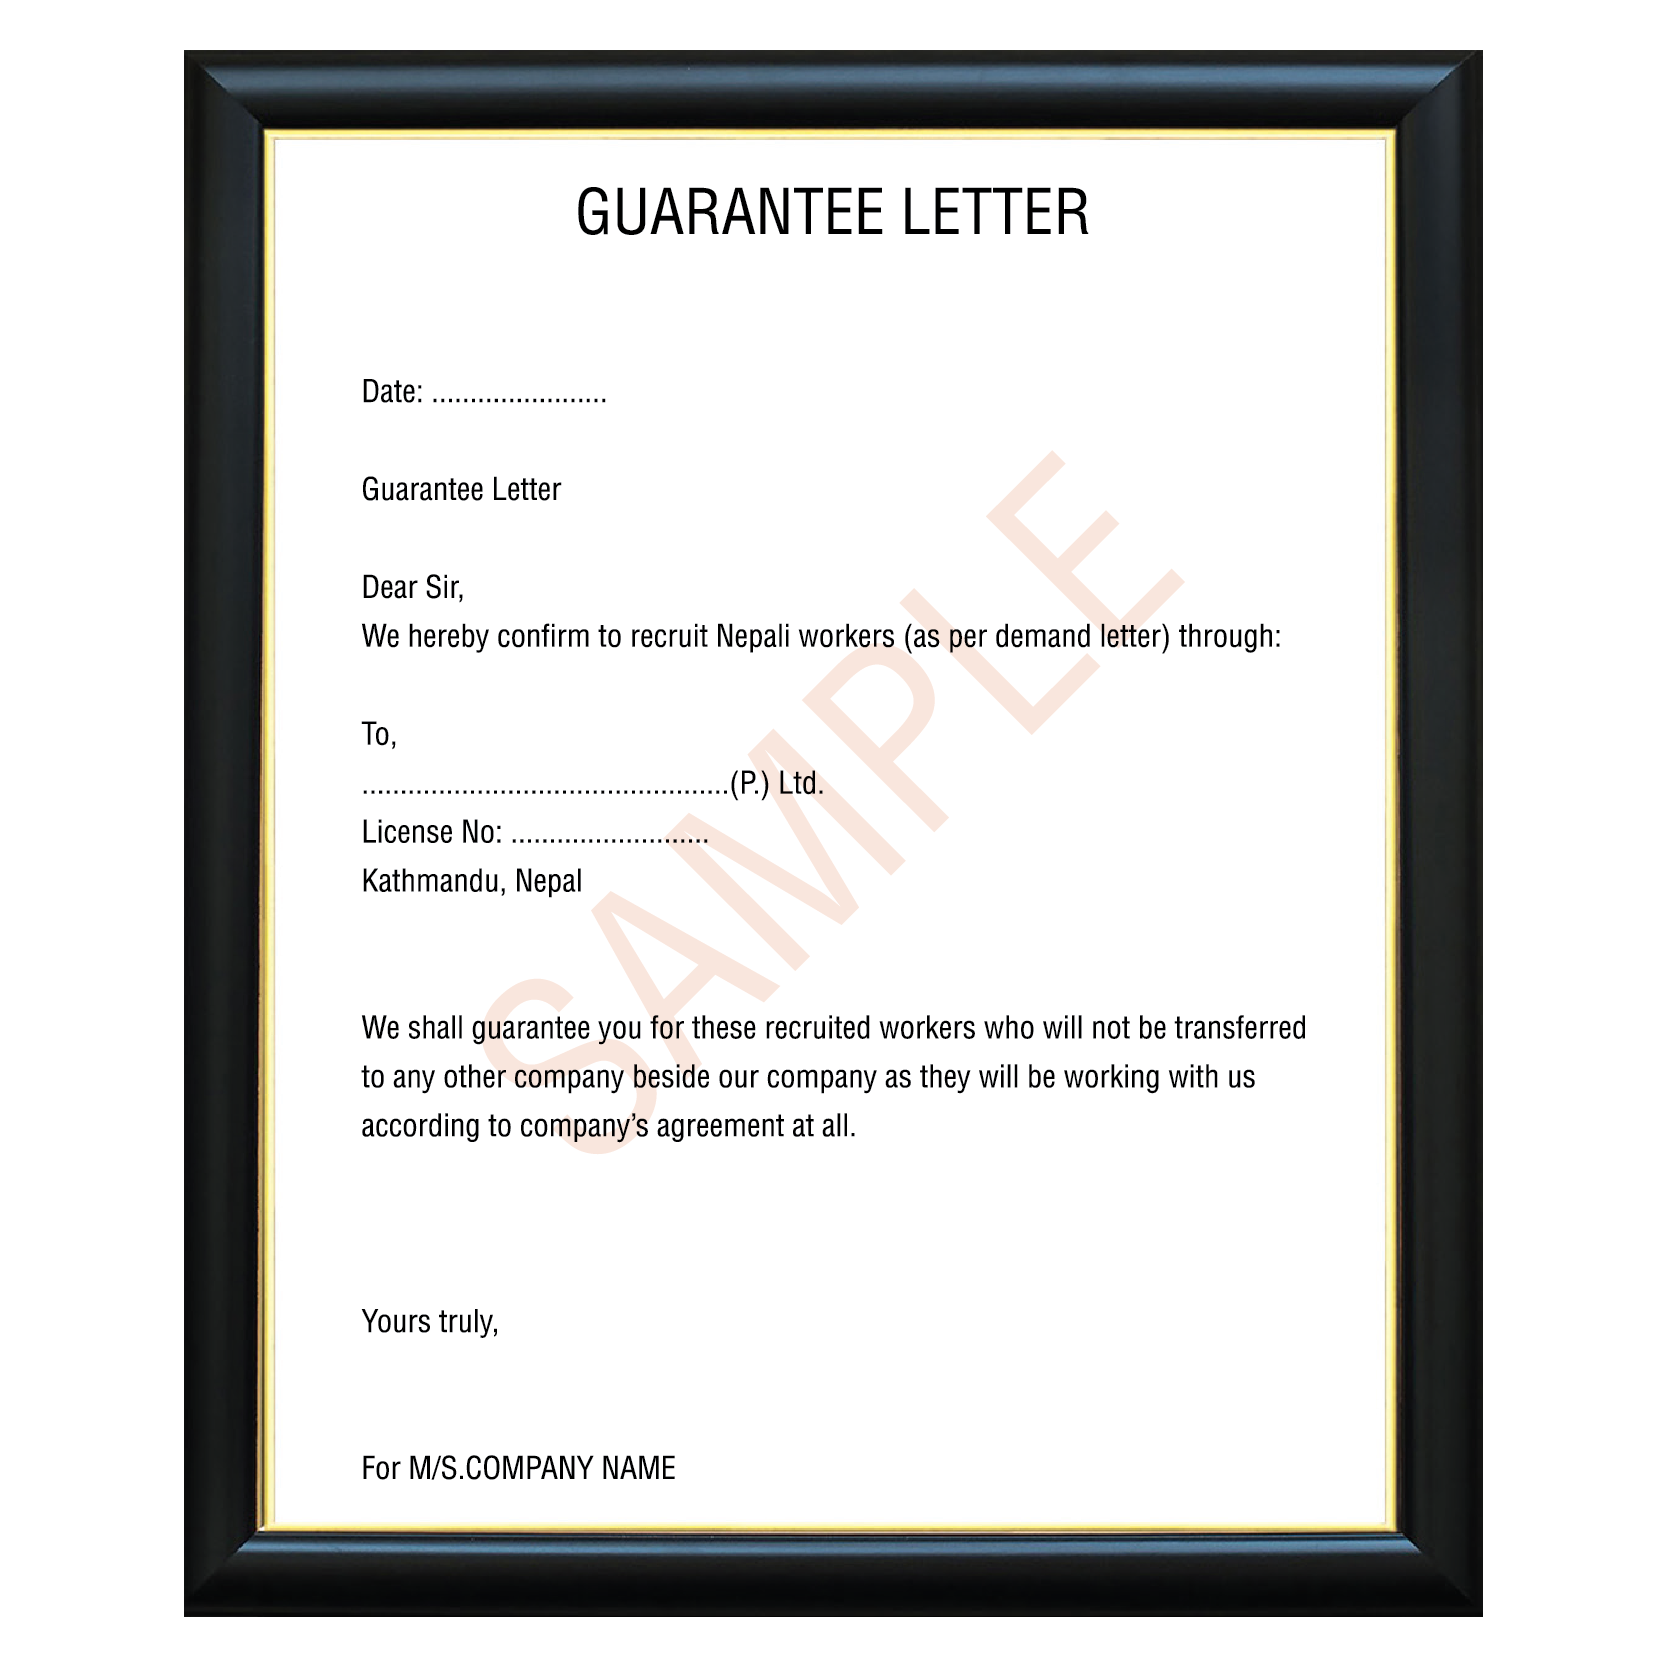 GUAREENTEE LETTER-01